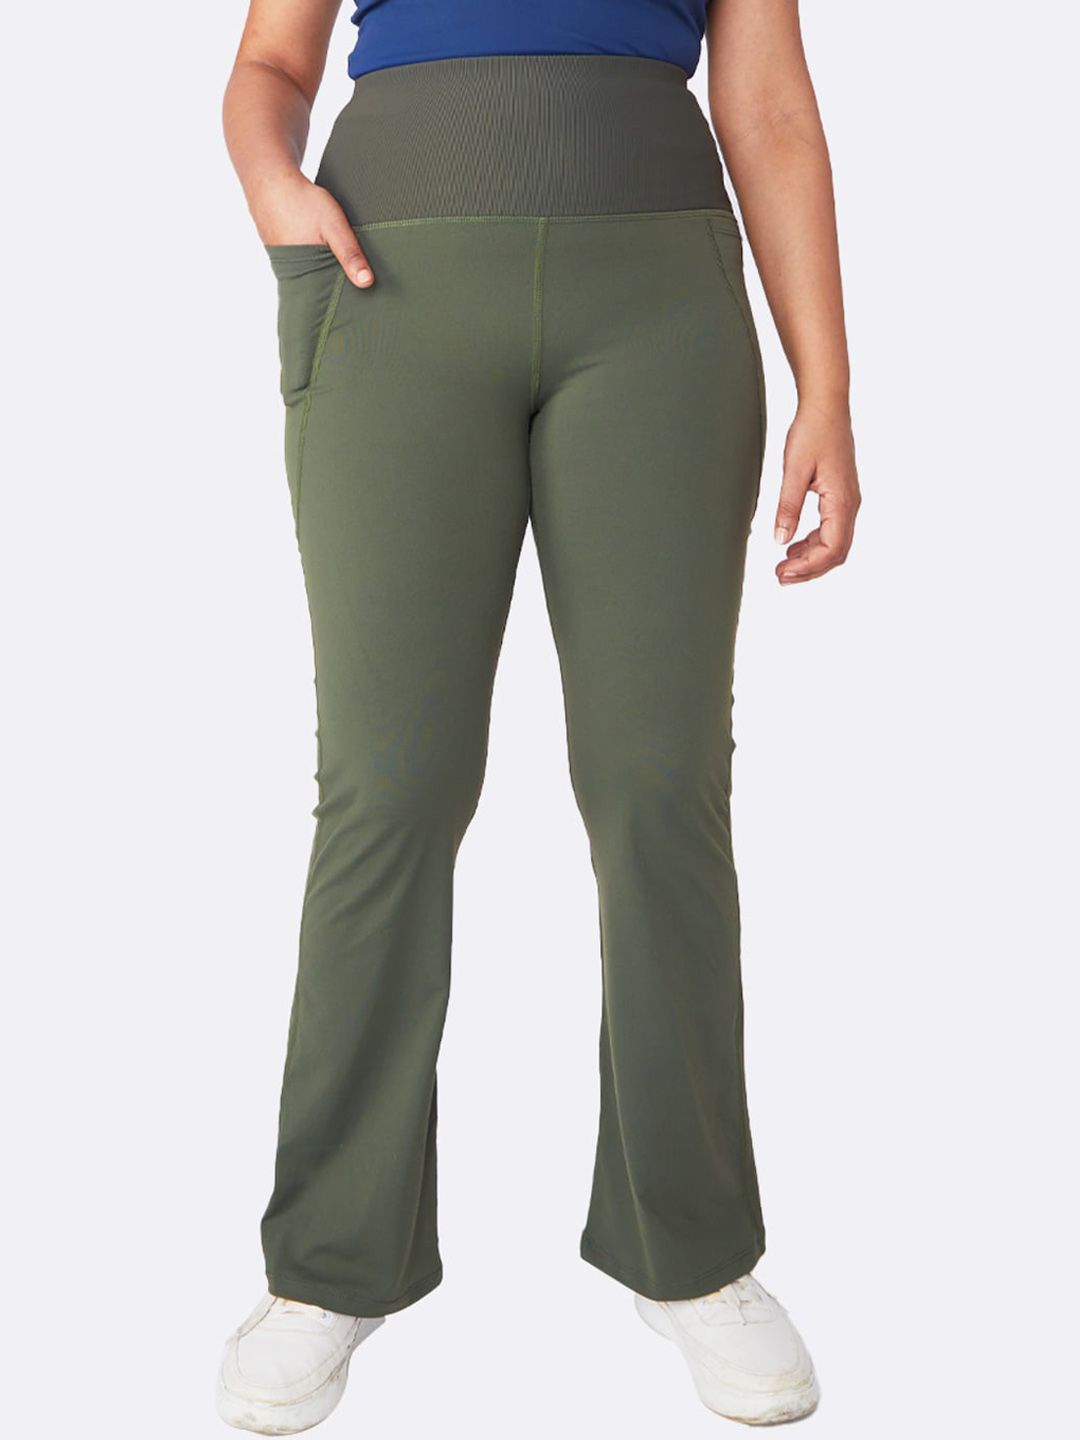 BlissClub Women Olive Green High-Waist Track Pants Price in India